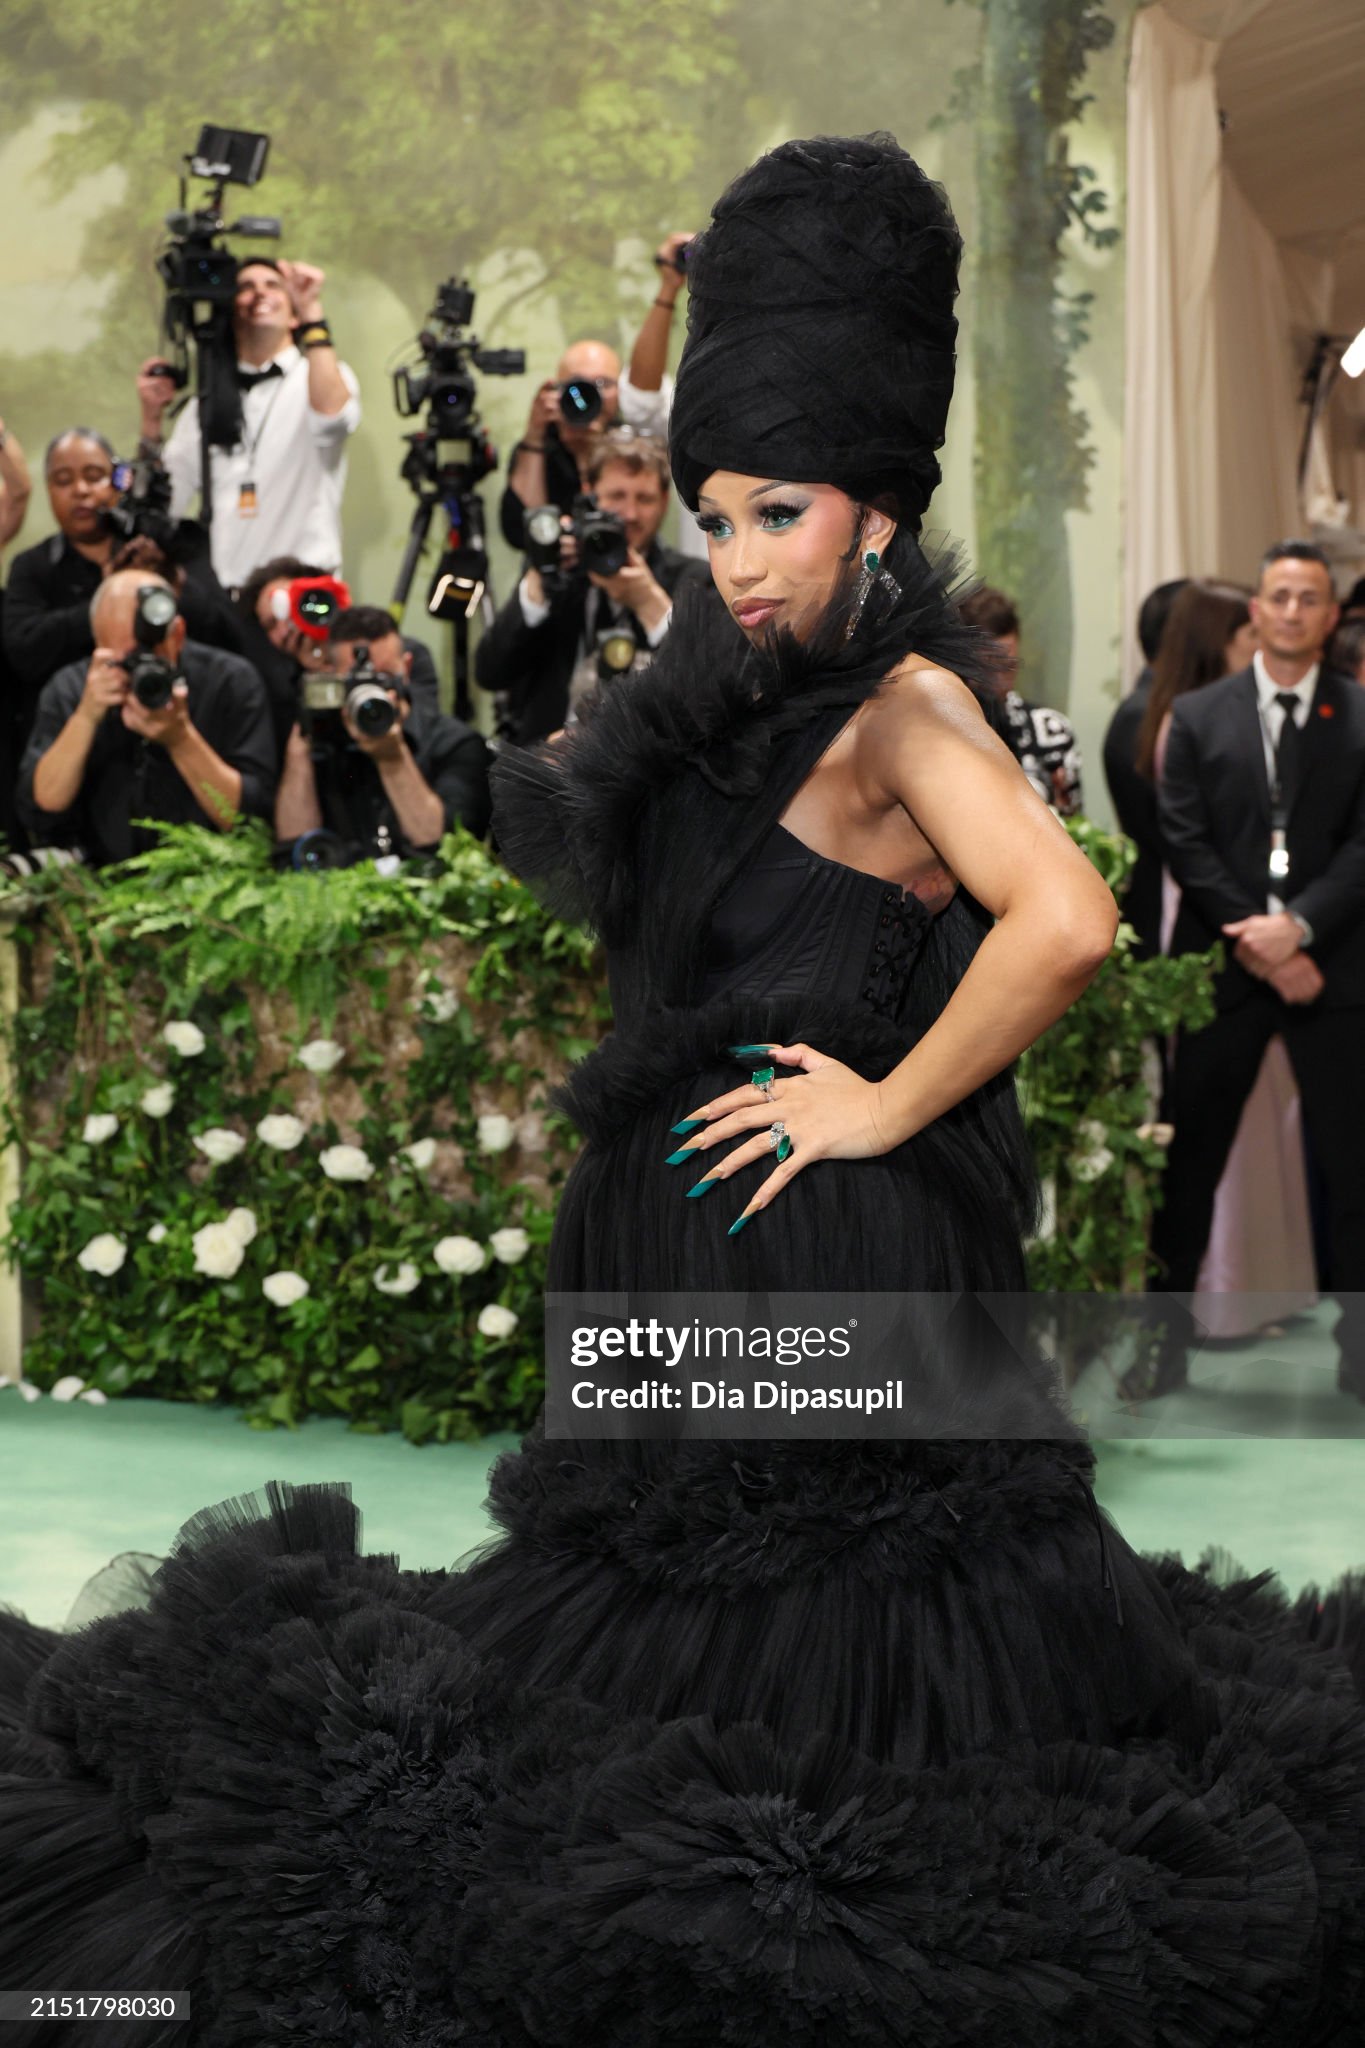 gettyimages-2151798030-2048x2048.jpg